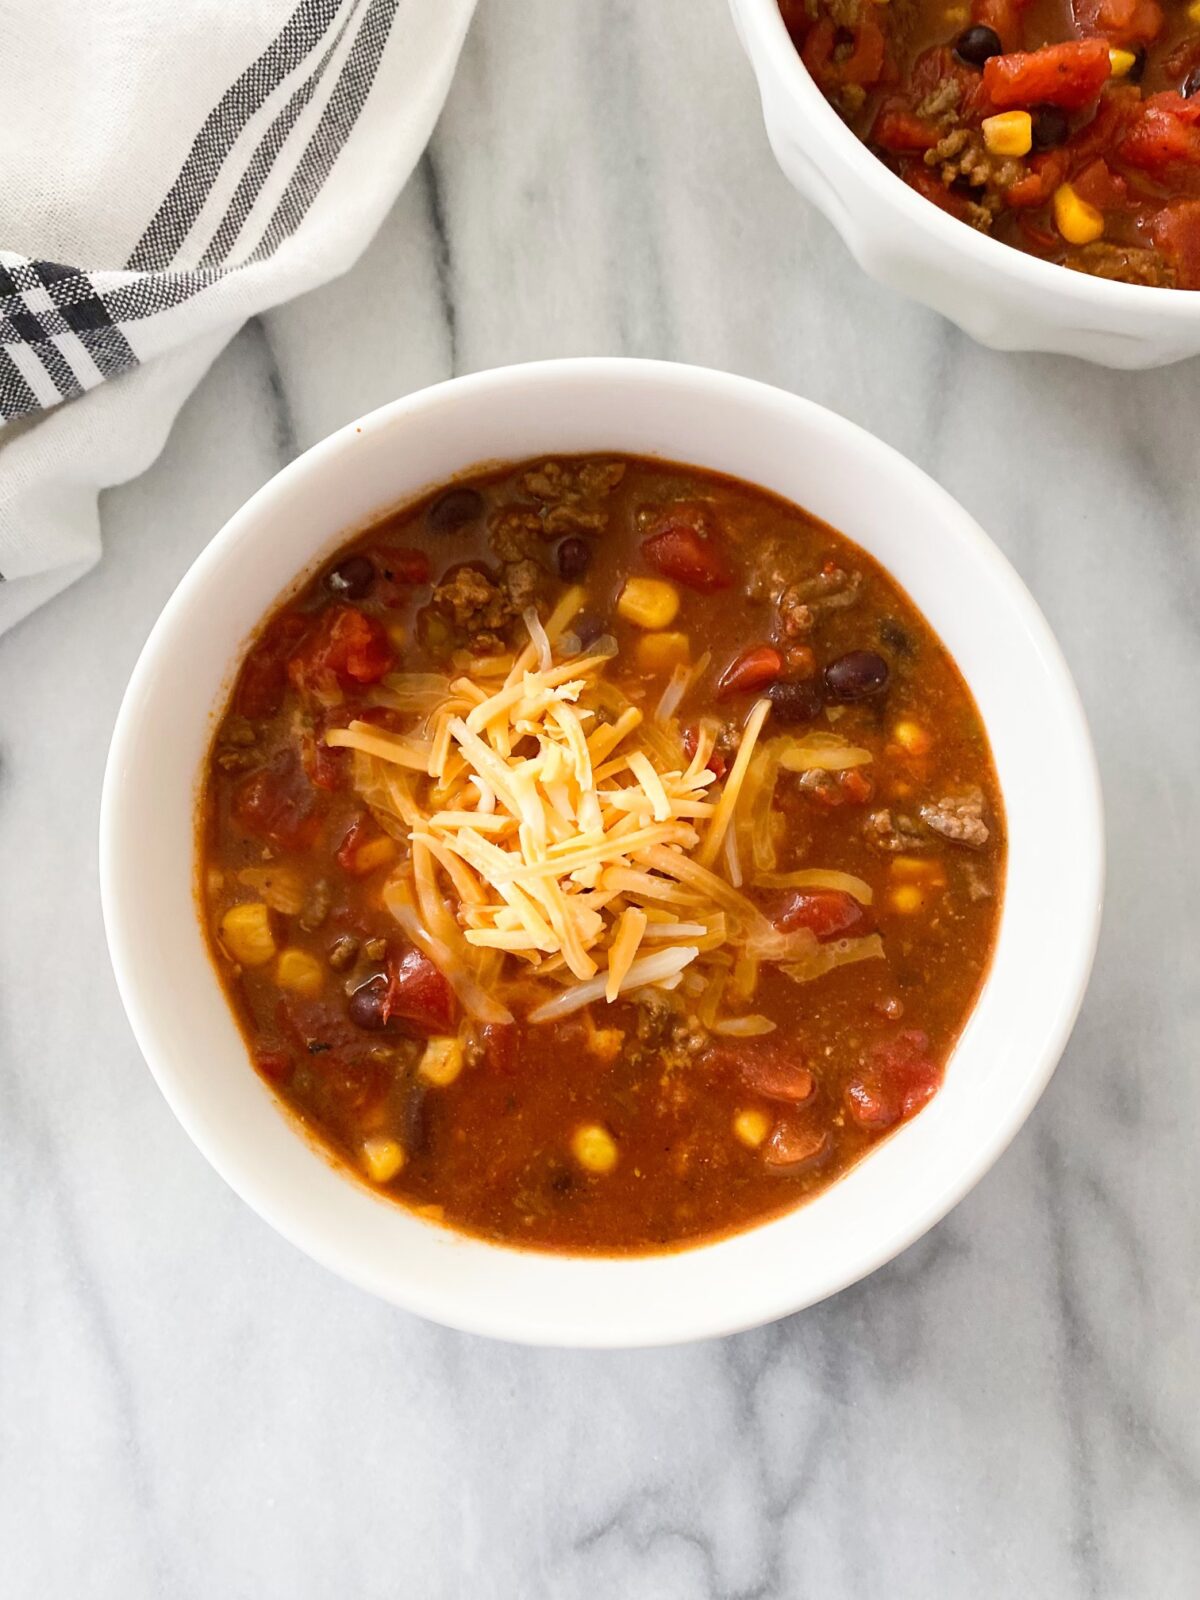 crockpot taco soup is an easy recipe of tomatoes, corn, beans and meat in a savory broth